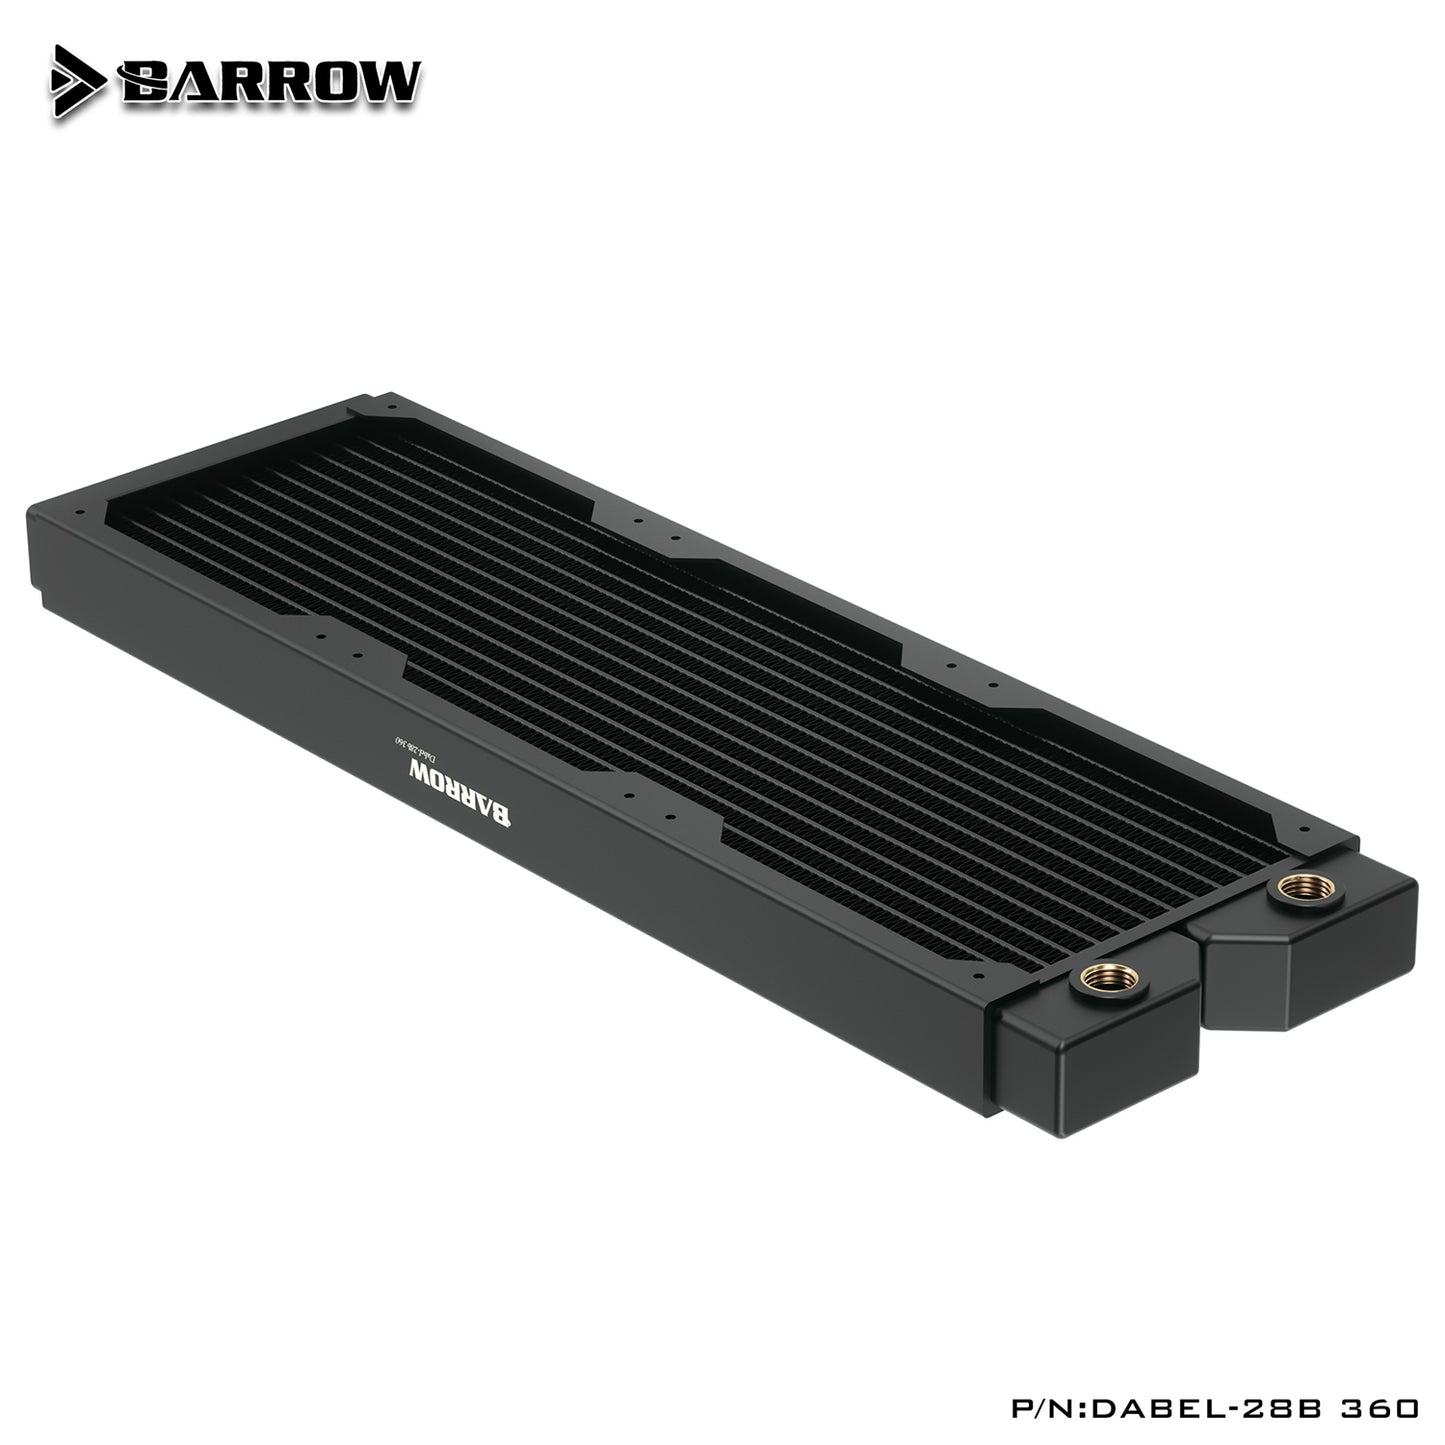 Barrow 120/240/360/480 Red Copper Radiator, Black/White 28mm Thickness G1/4" Thread High-density Revolving Heat Dissipation Passageway Radiator, For Water Cooling System, Dabel-28b Dabel-28a